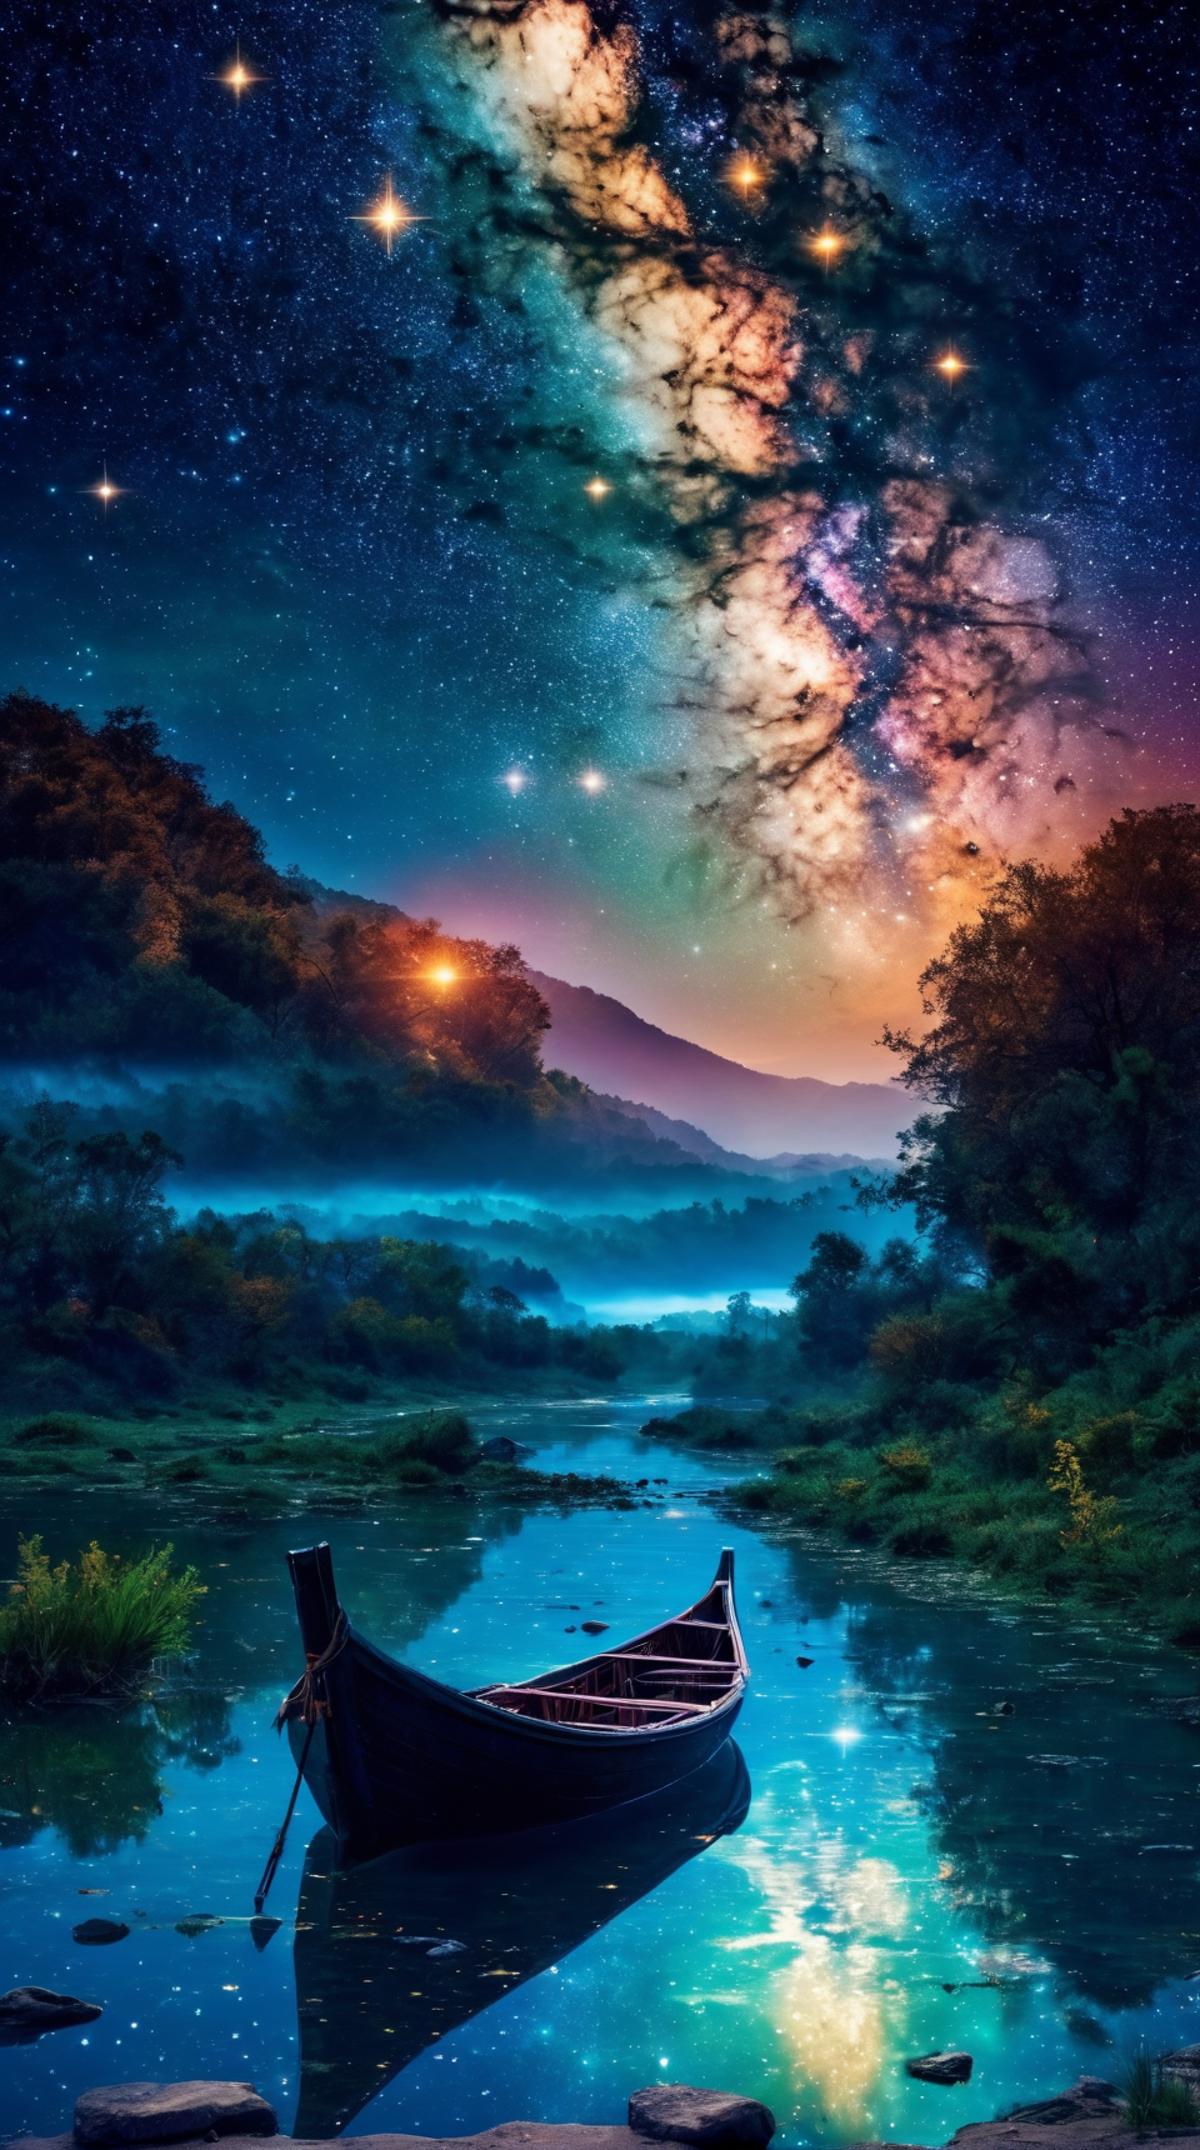 A boat on a river with a starry night sky.